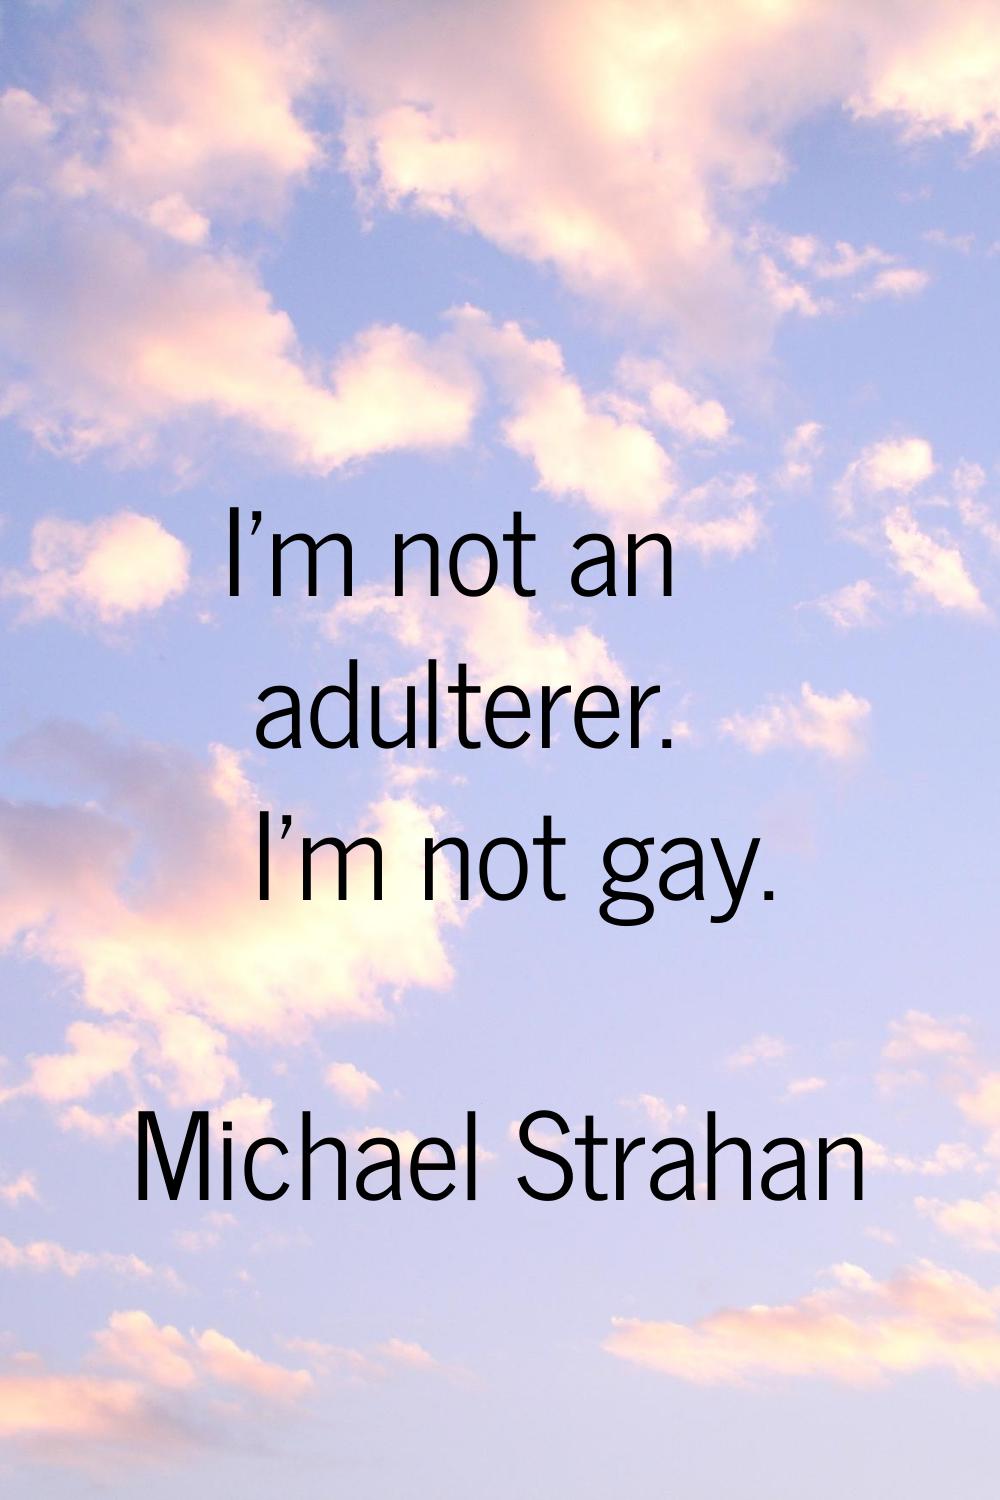 I'm not an adulterer. I'm not gay.